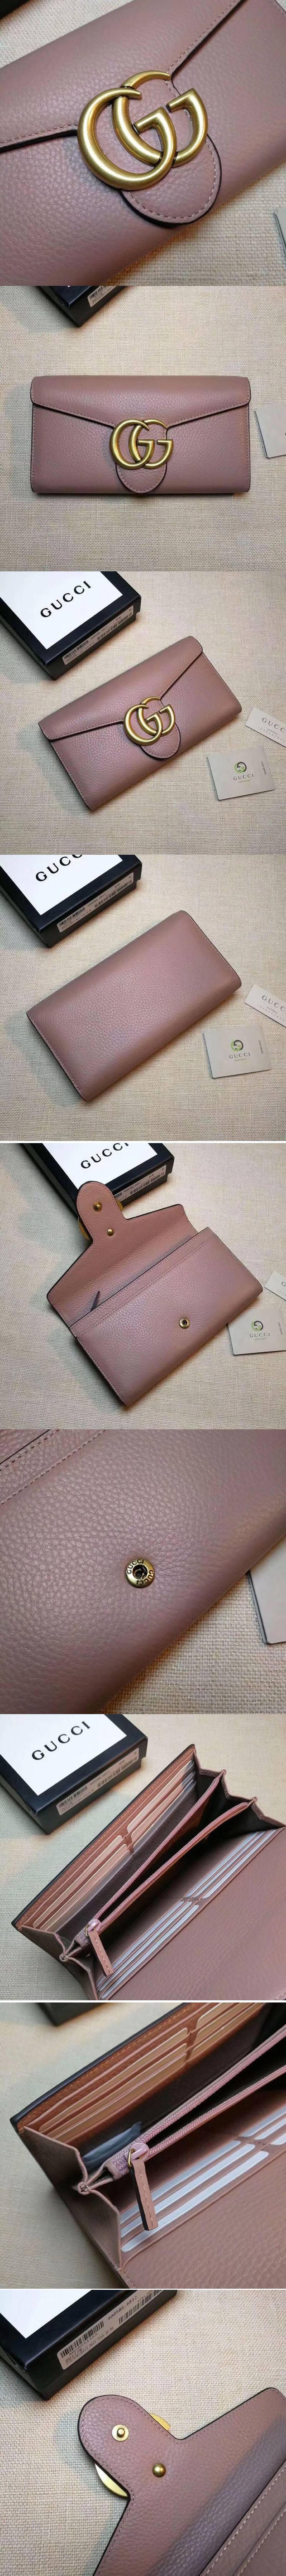 Replica Gucci 400586 GG Marmont Continental Wallet Pink